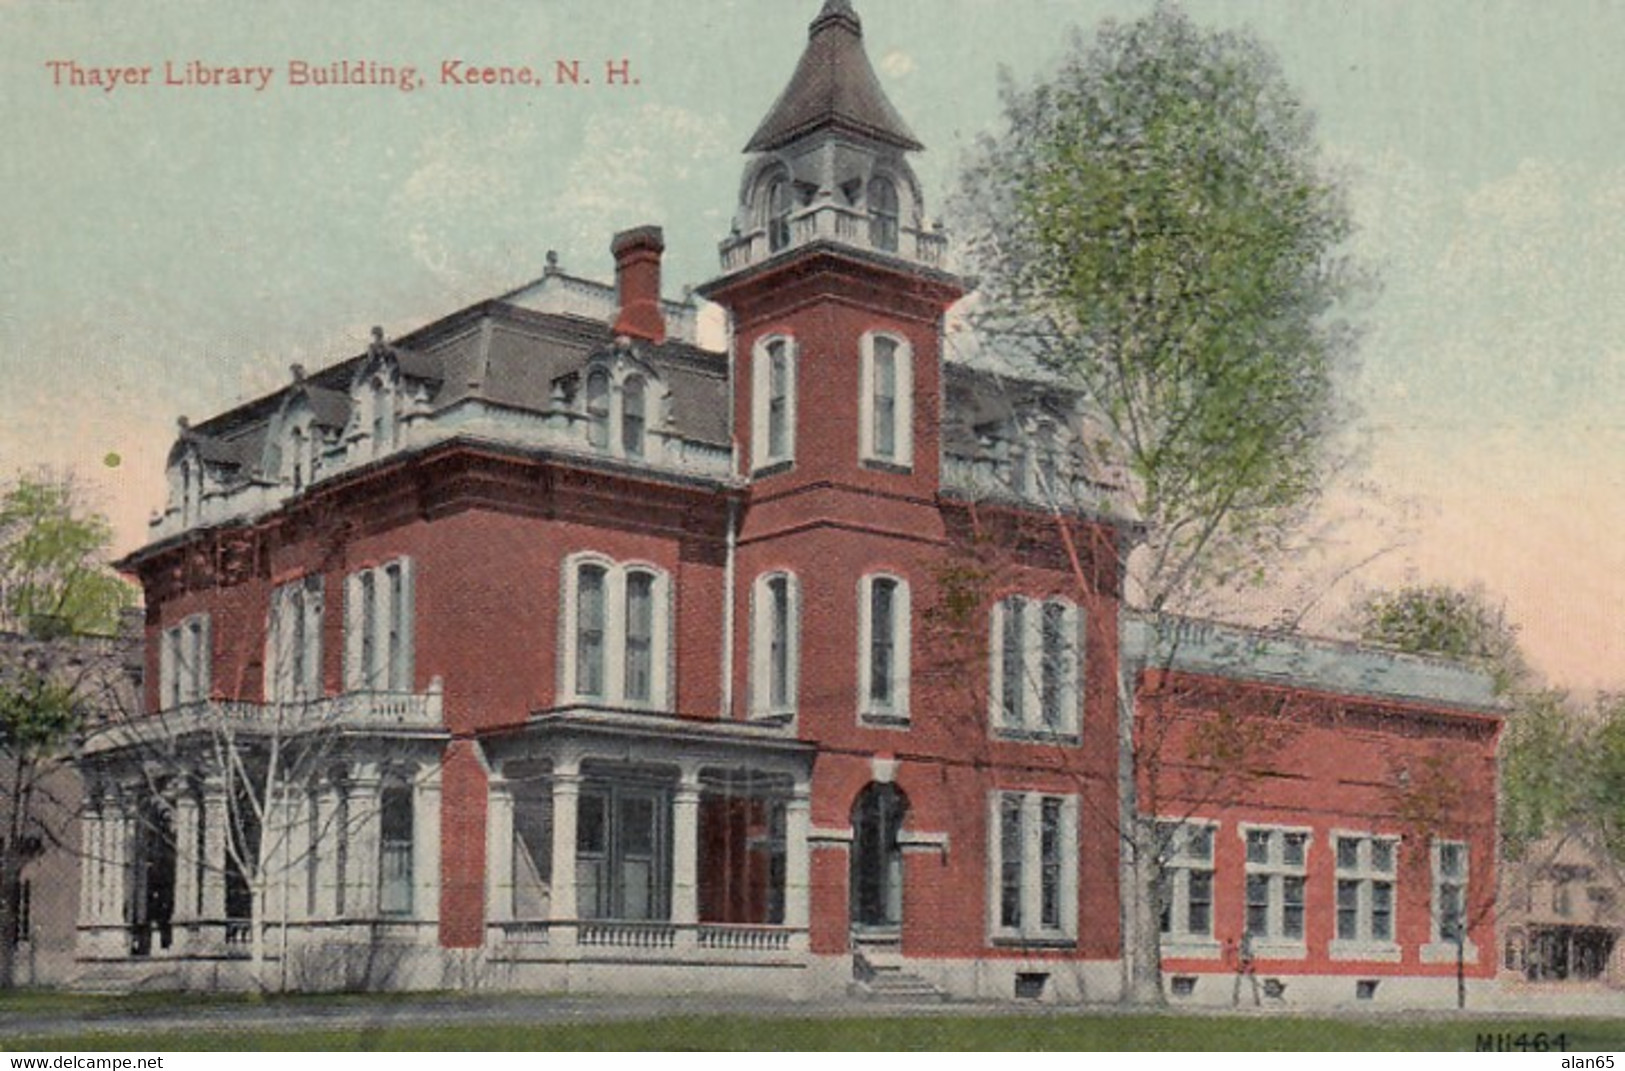 Keene New Hampshire, Thayer Library Building Architecture, C1900s/10s Vintage Postcard - Bibliothèques